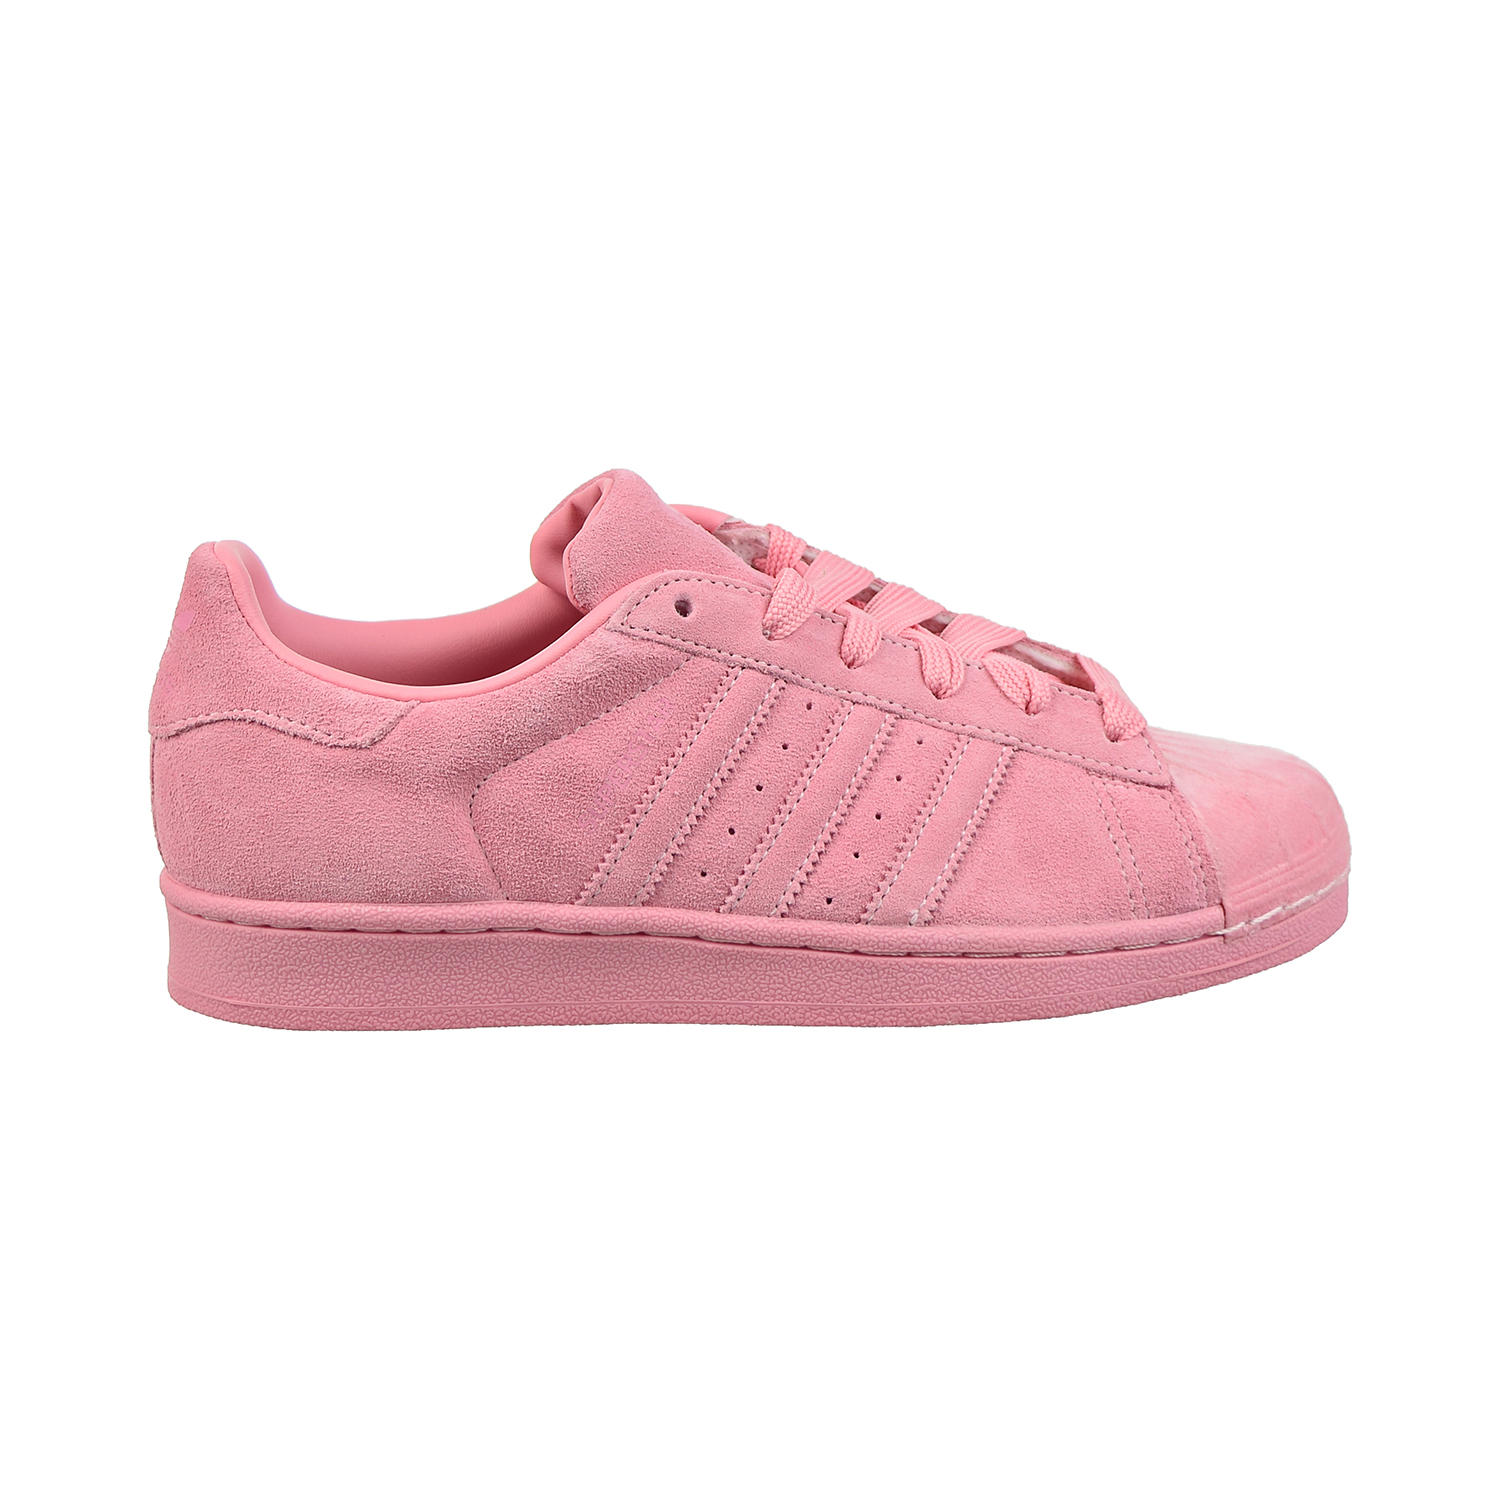 Adidas Superstar Womens Shoes Clear Pink-Clear Pink-Clear Pink cg6004 | eBay